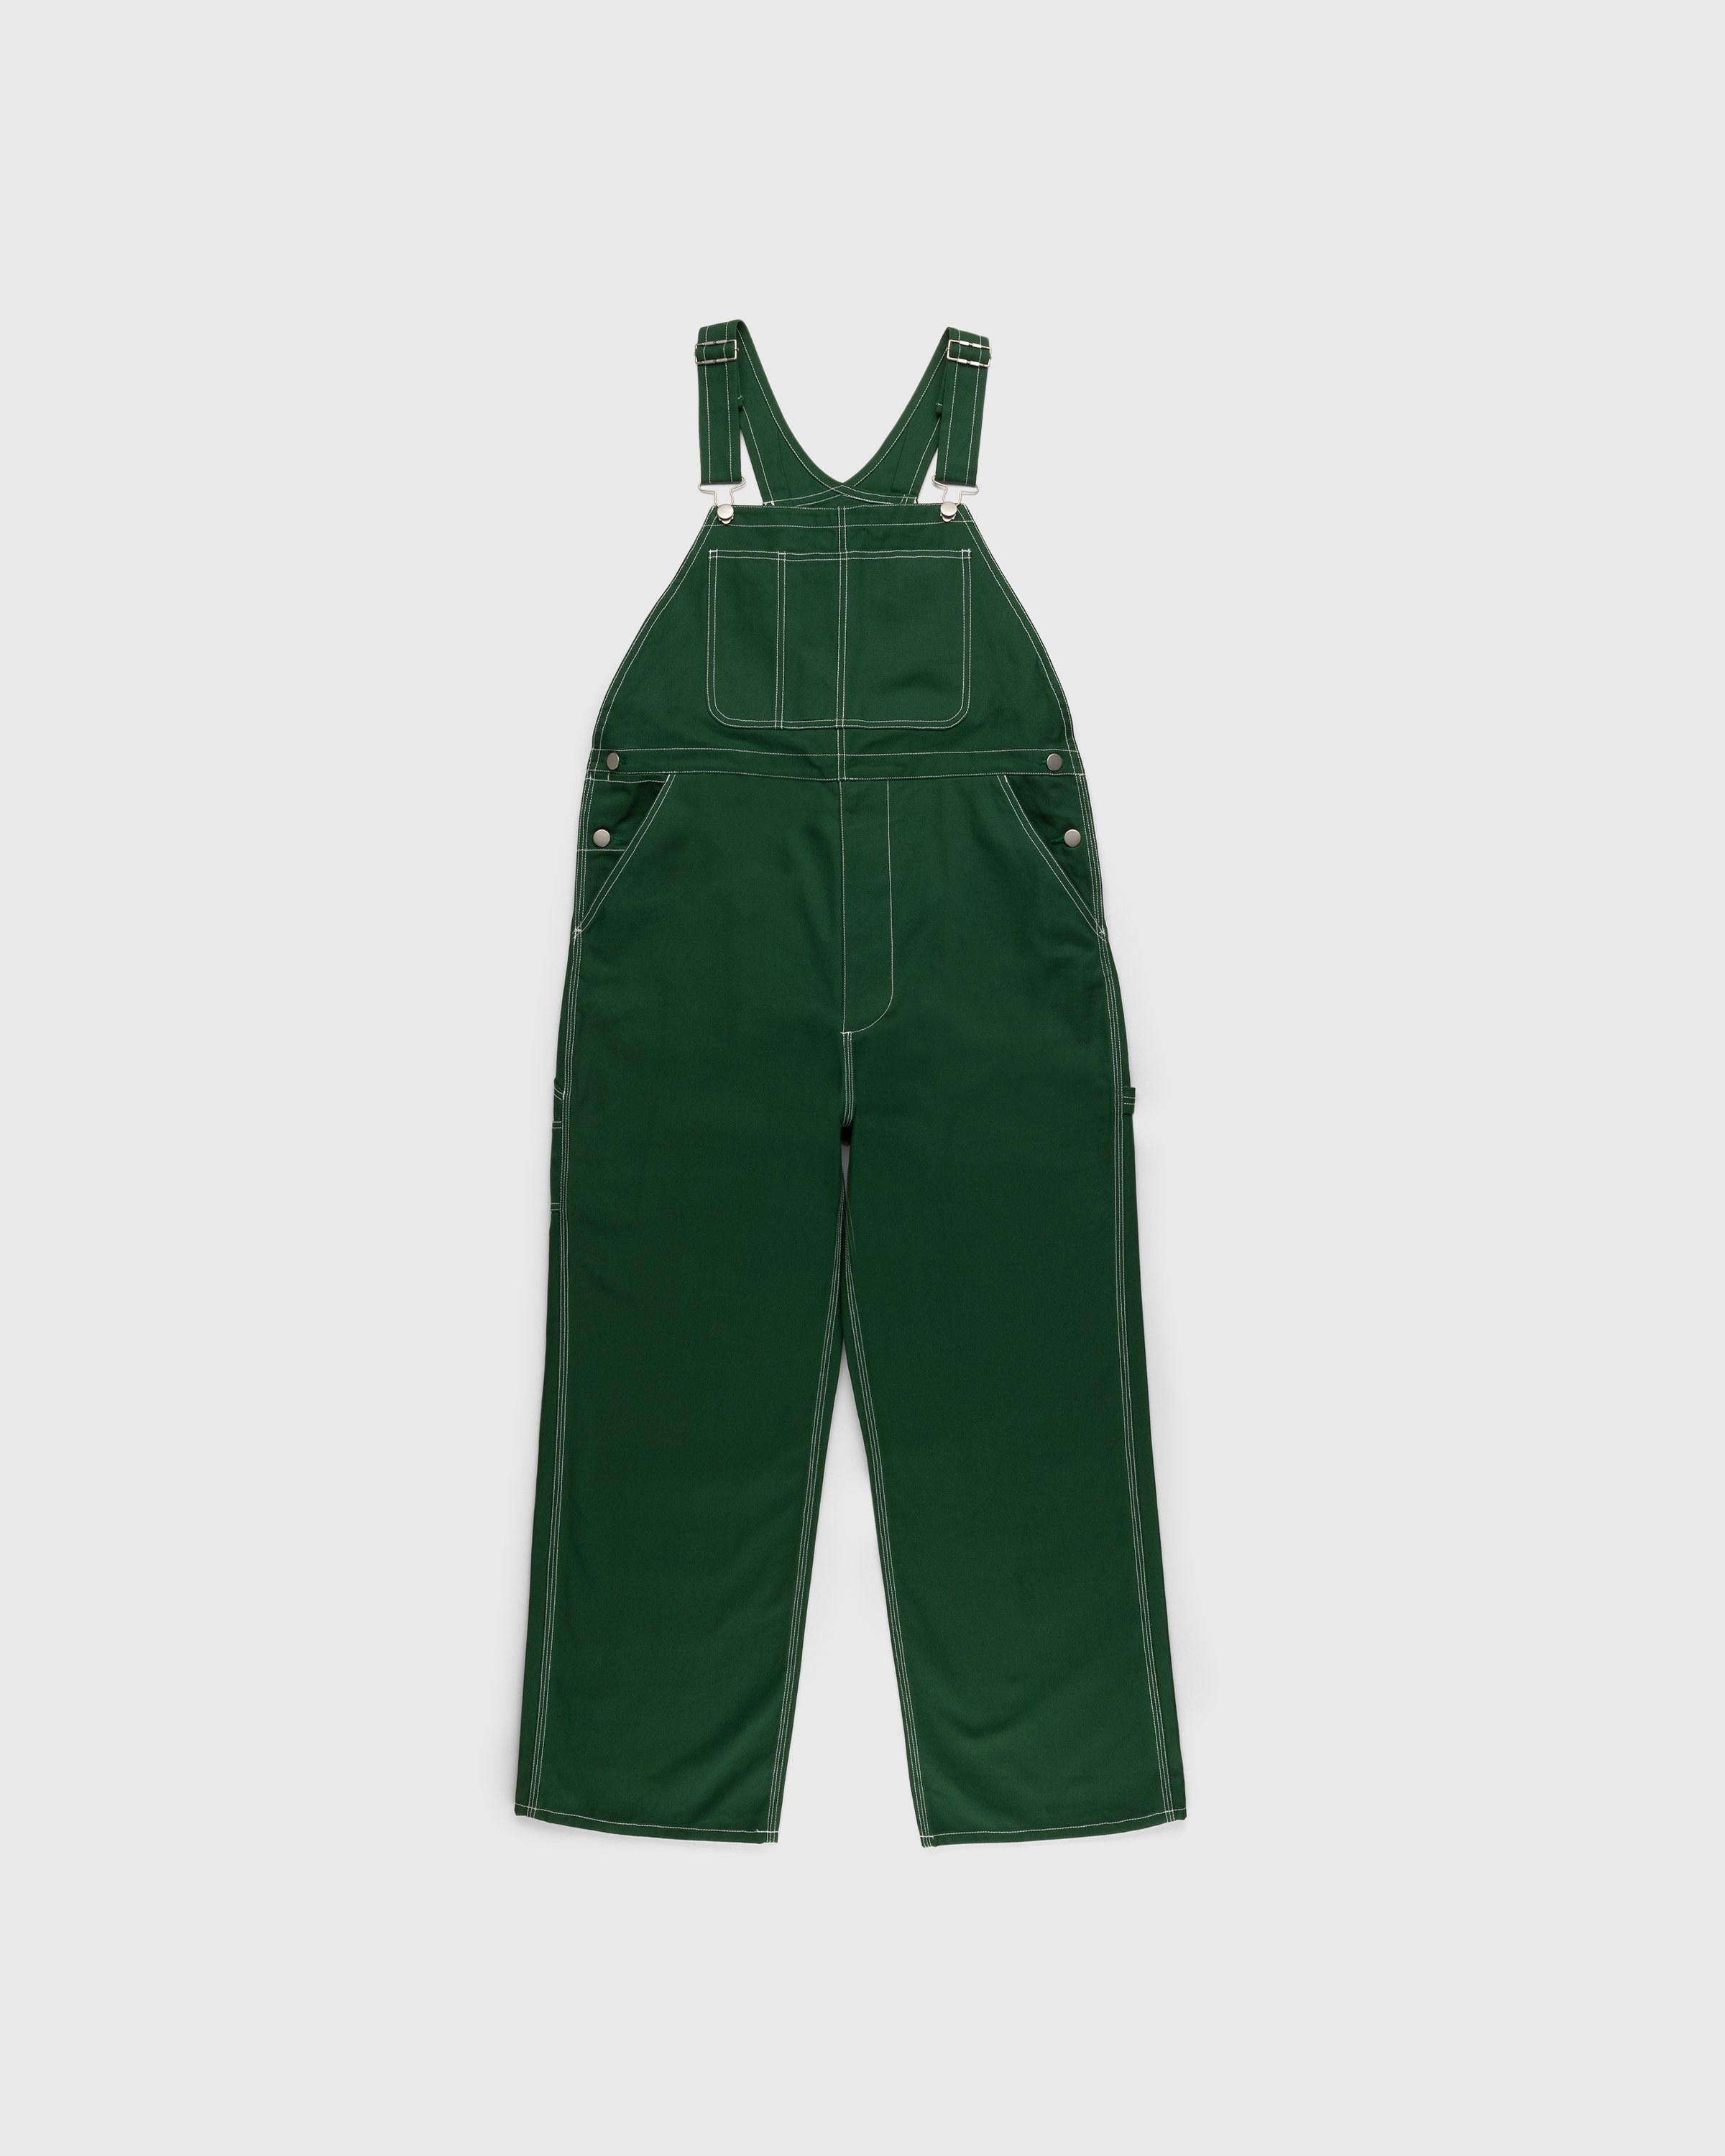 RUF x Highsnobiety - Cotton Overalls Green - Clothing - Green - Image 2